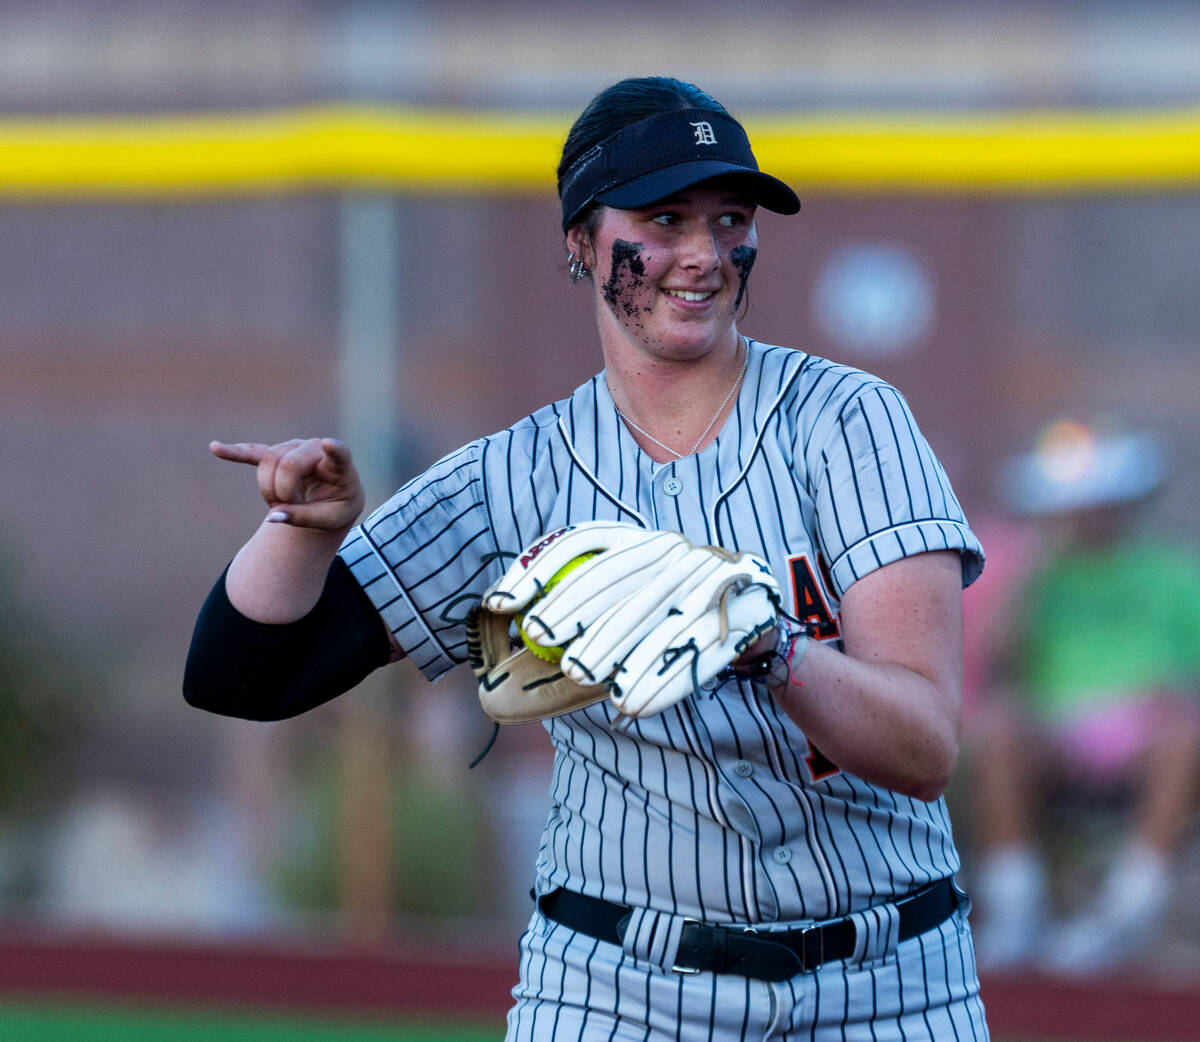 Douglas pitcher Talia Tretton (19) signals two outs against Palo Verde during the seventh innin ...